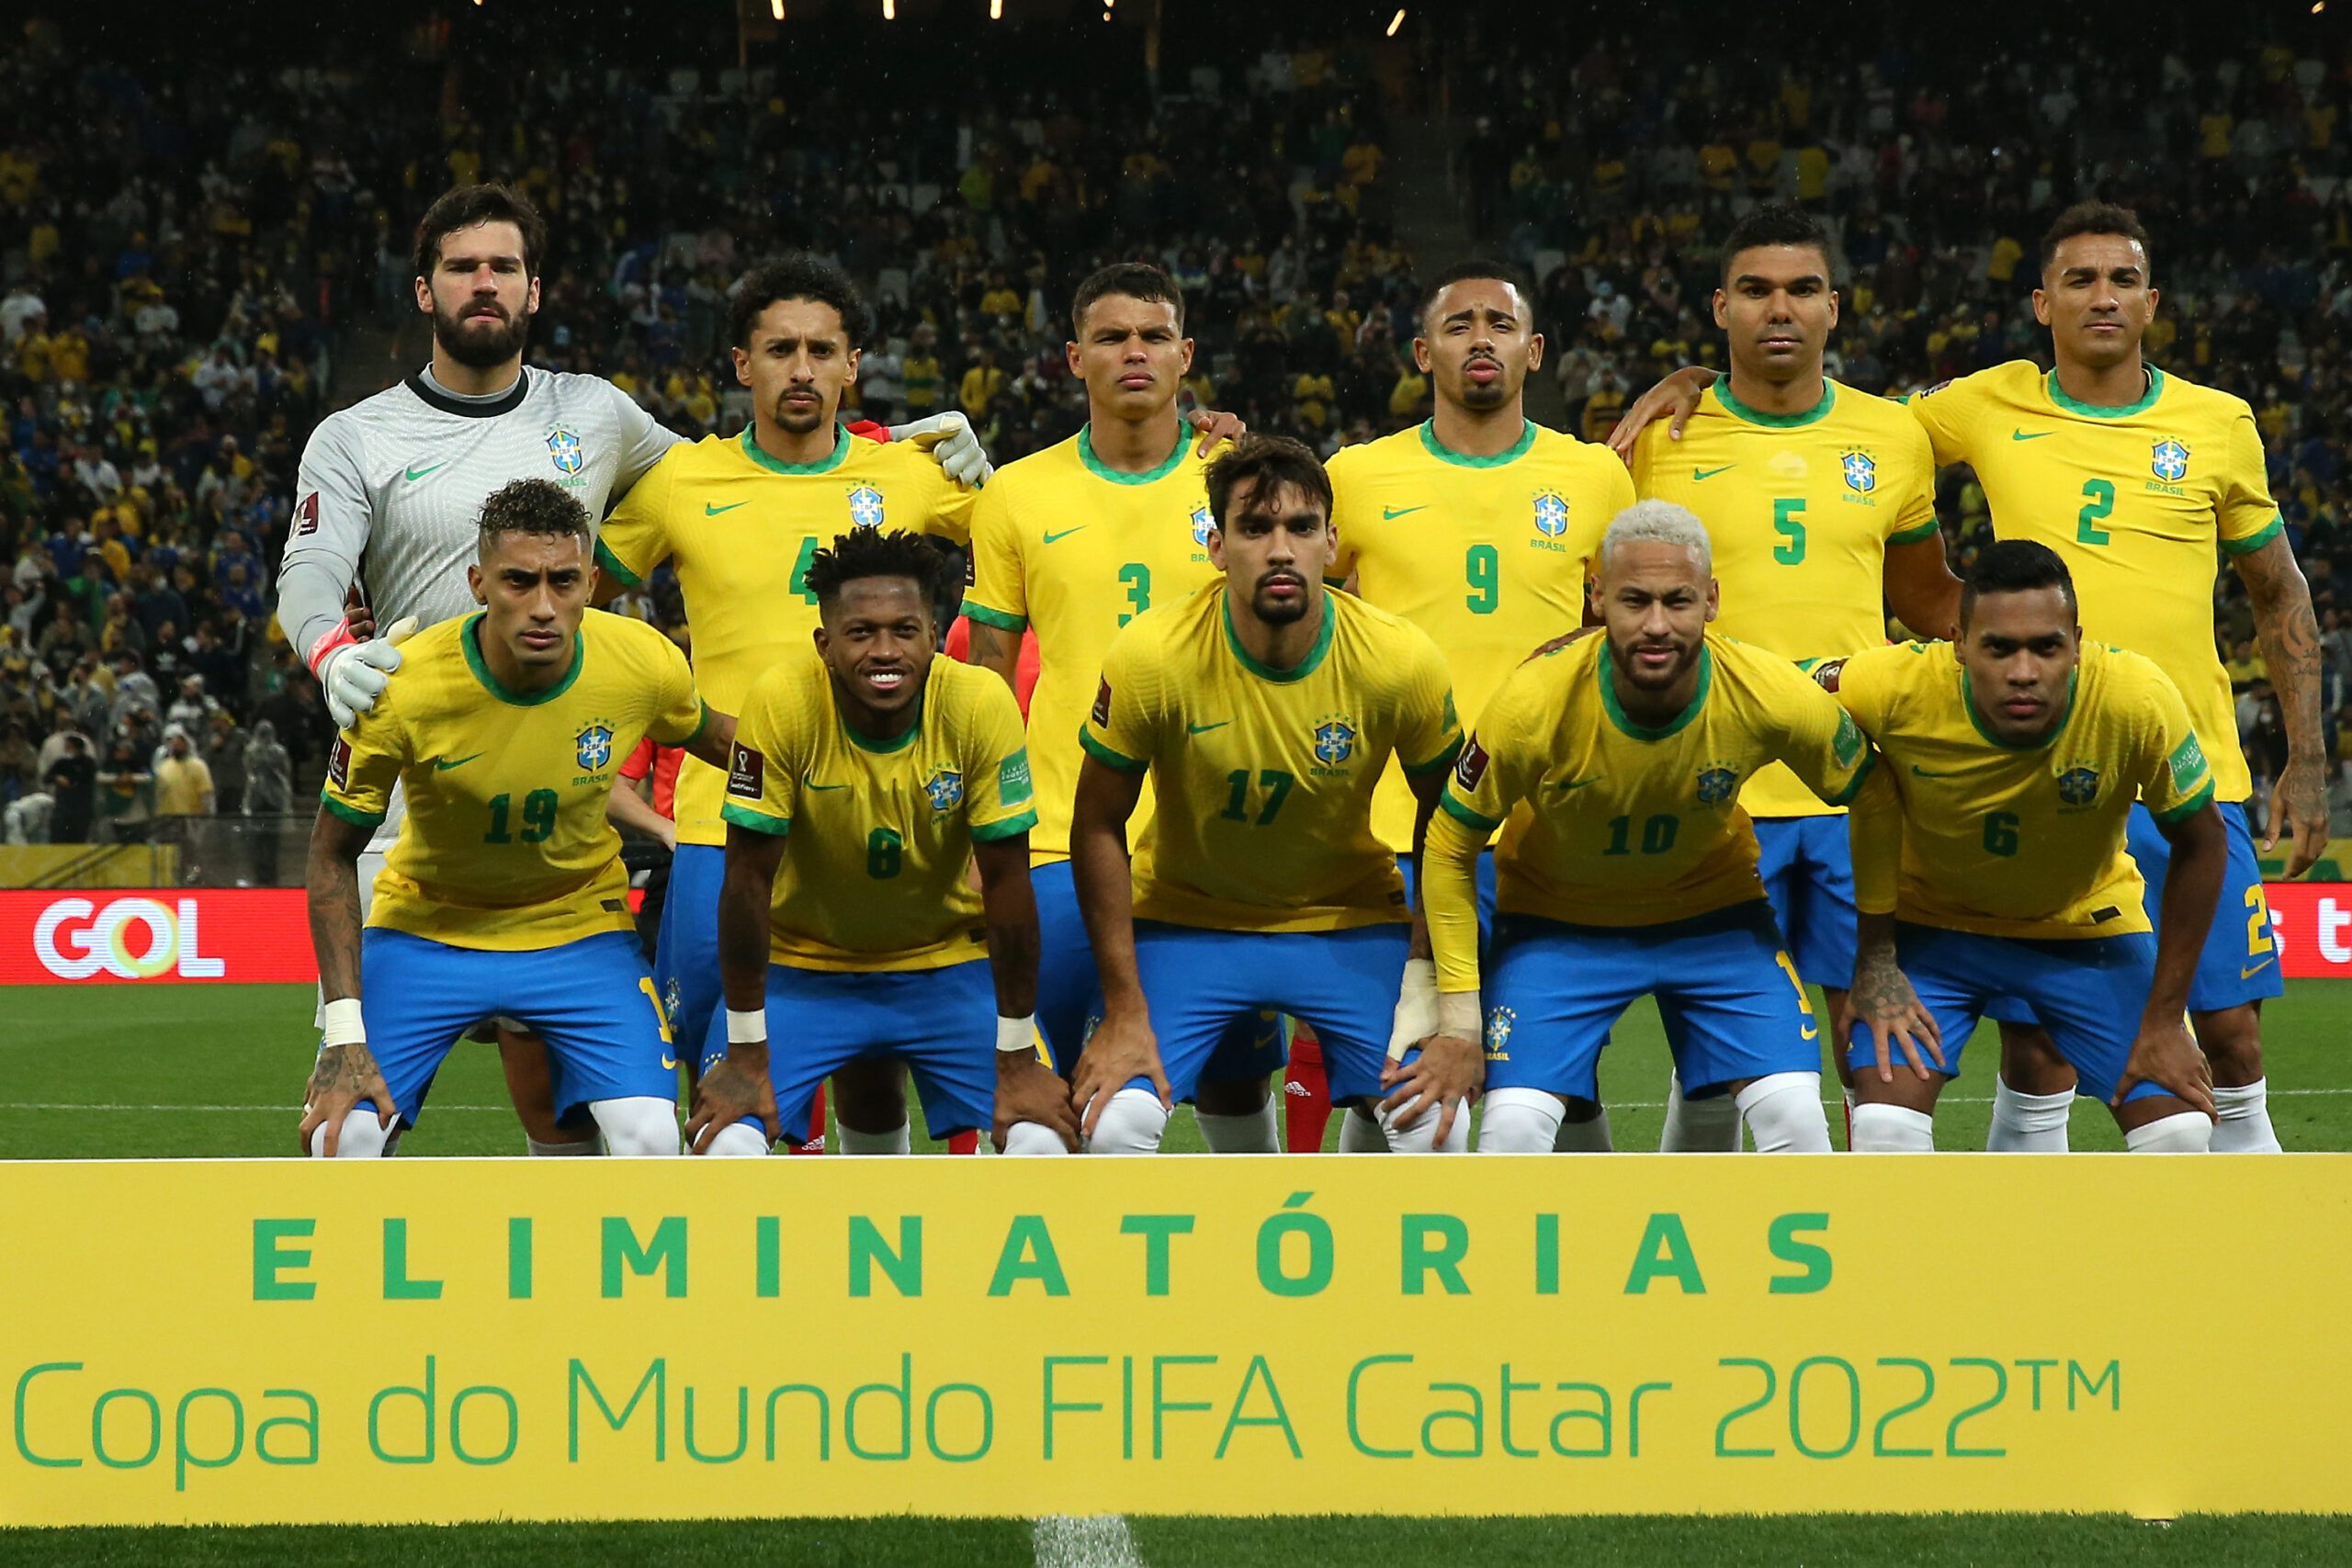 Brazil World Cup squad Graphic shows why they're favourites